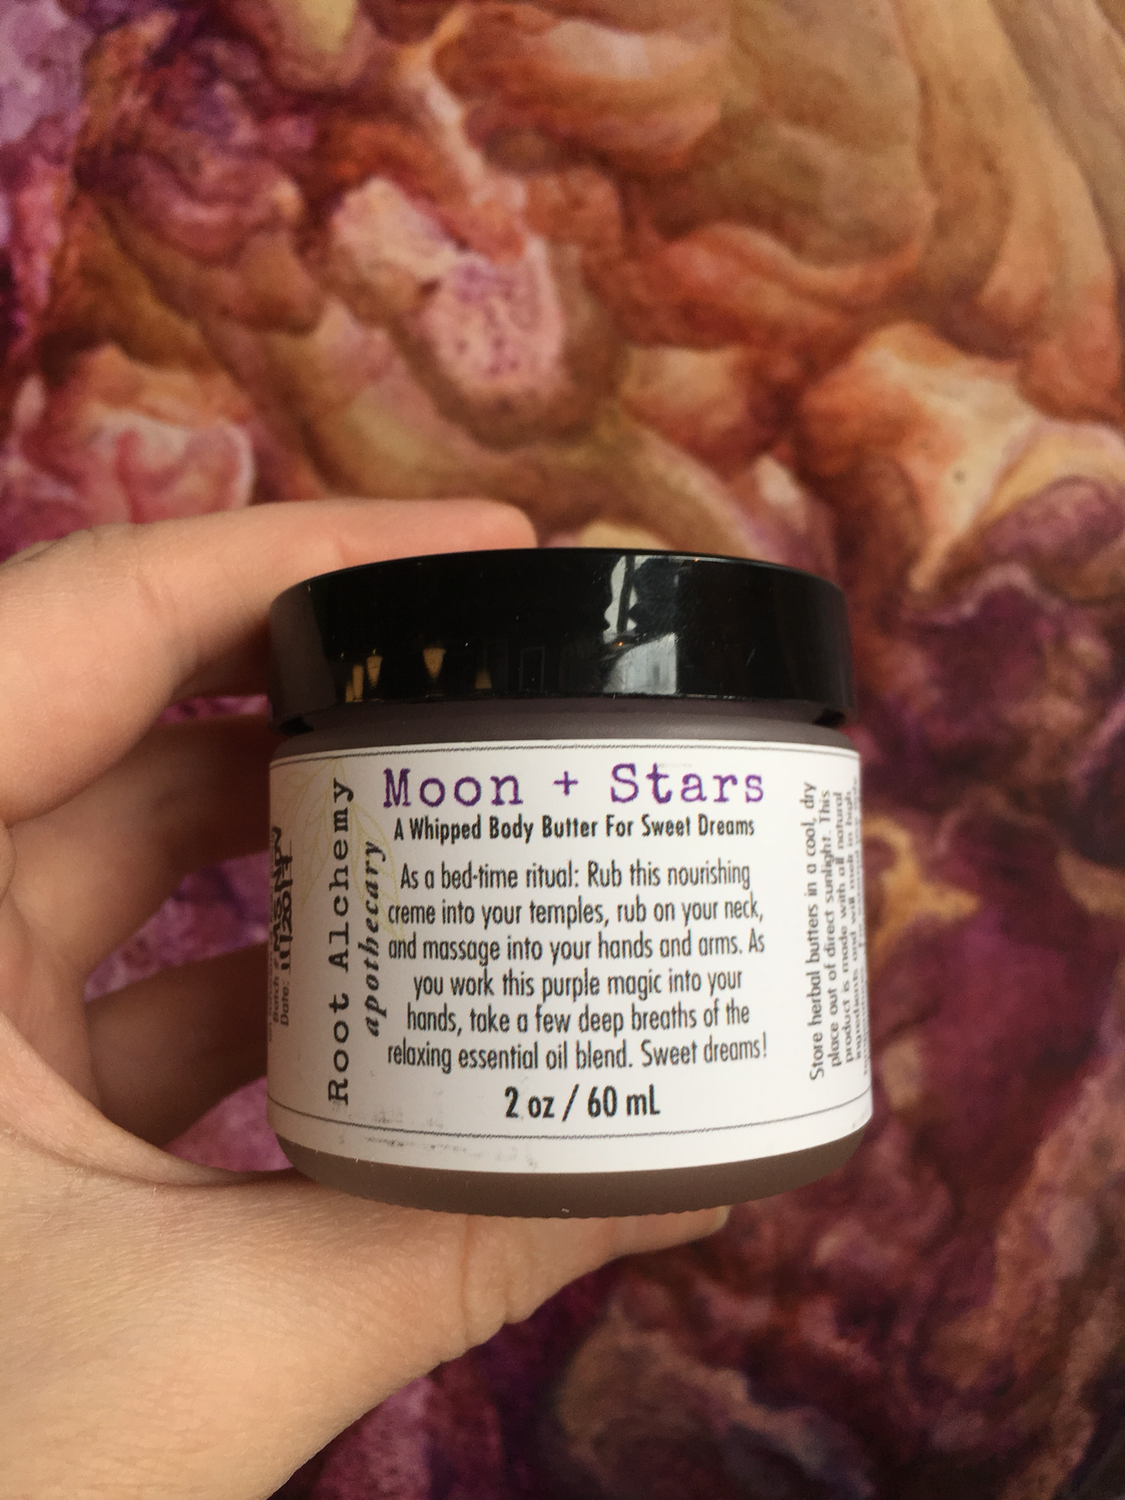 Moon + Stars: A Whipped Body Butter For Sweet Dreams